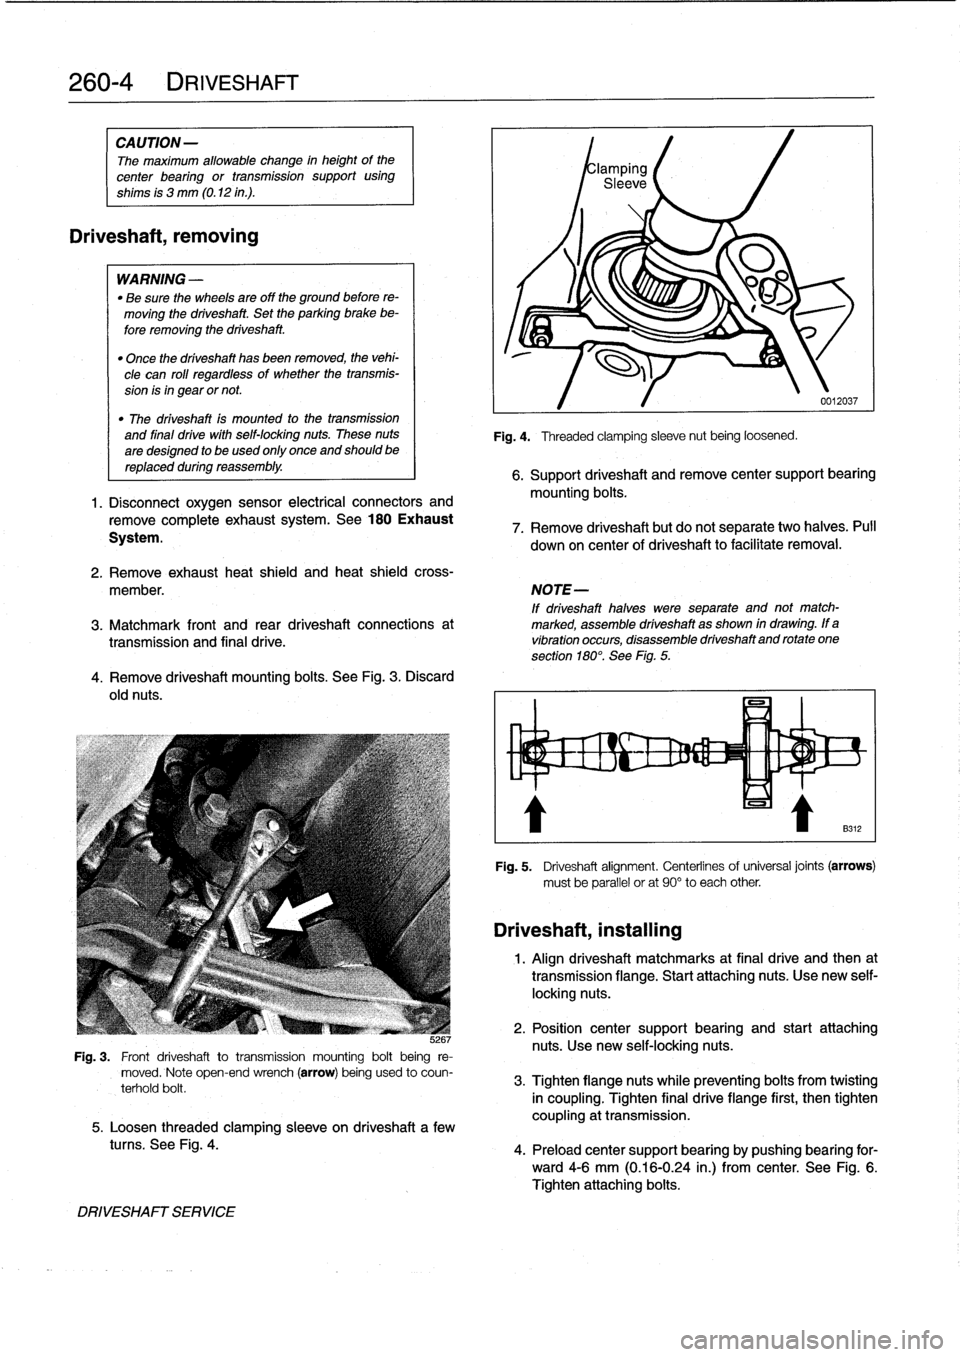 BMW 318i 1998 E36 Workshop Manual 
260-
4
DRIVESHAFT

CAUTION
-

The
maximum
allowable
change
in
height
of
the

center
bearing
or
transmission
support
using

shims
is
3
mm
(0
.12
in
.)
.

Driveshaft,
removing

WARNING
-

"
Be
sure
the